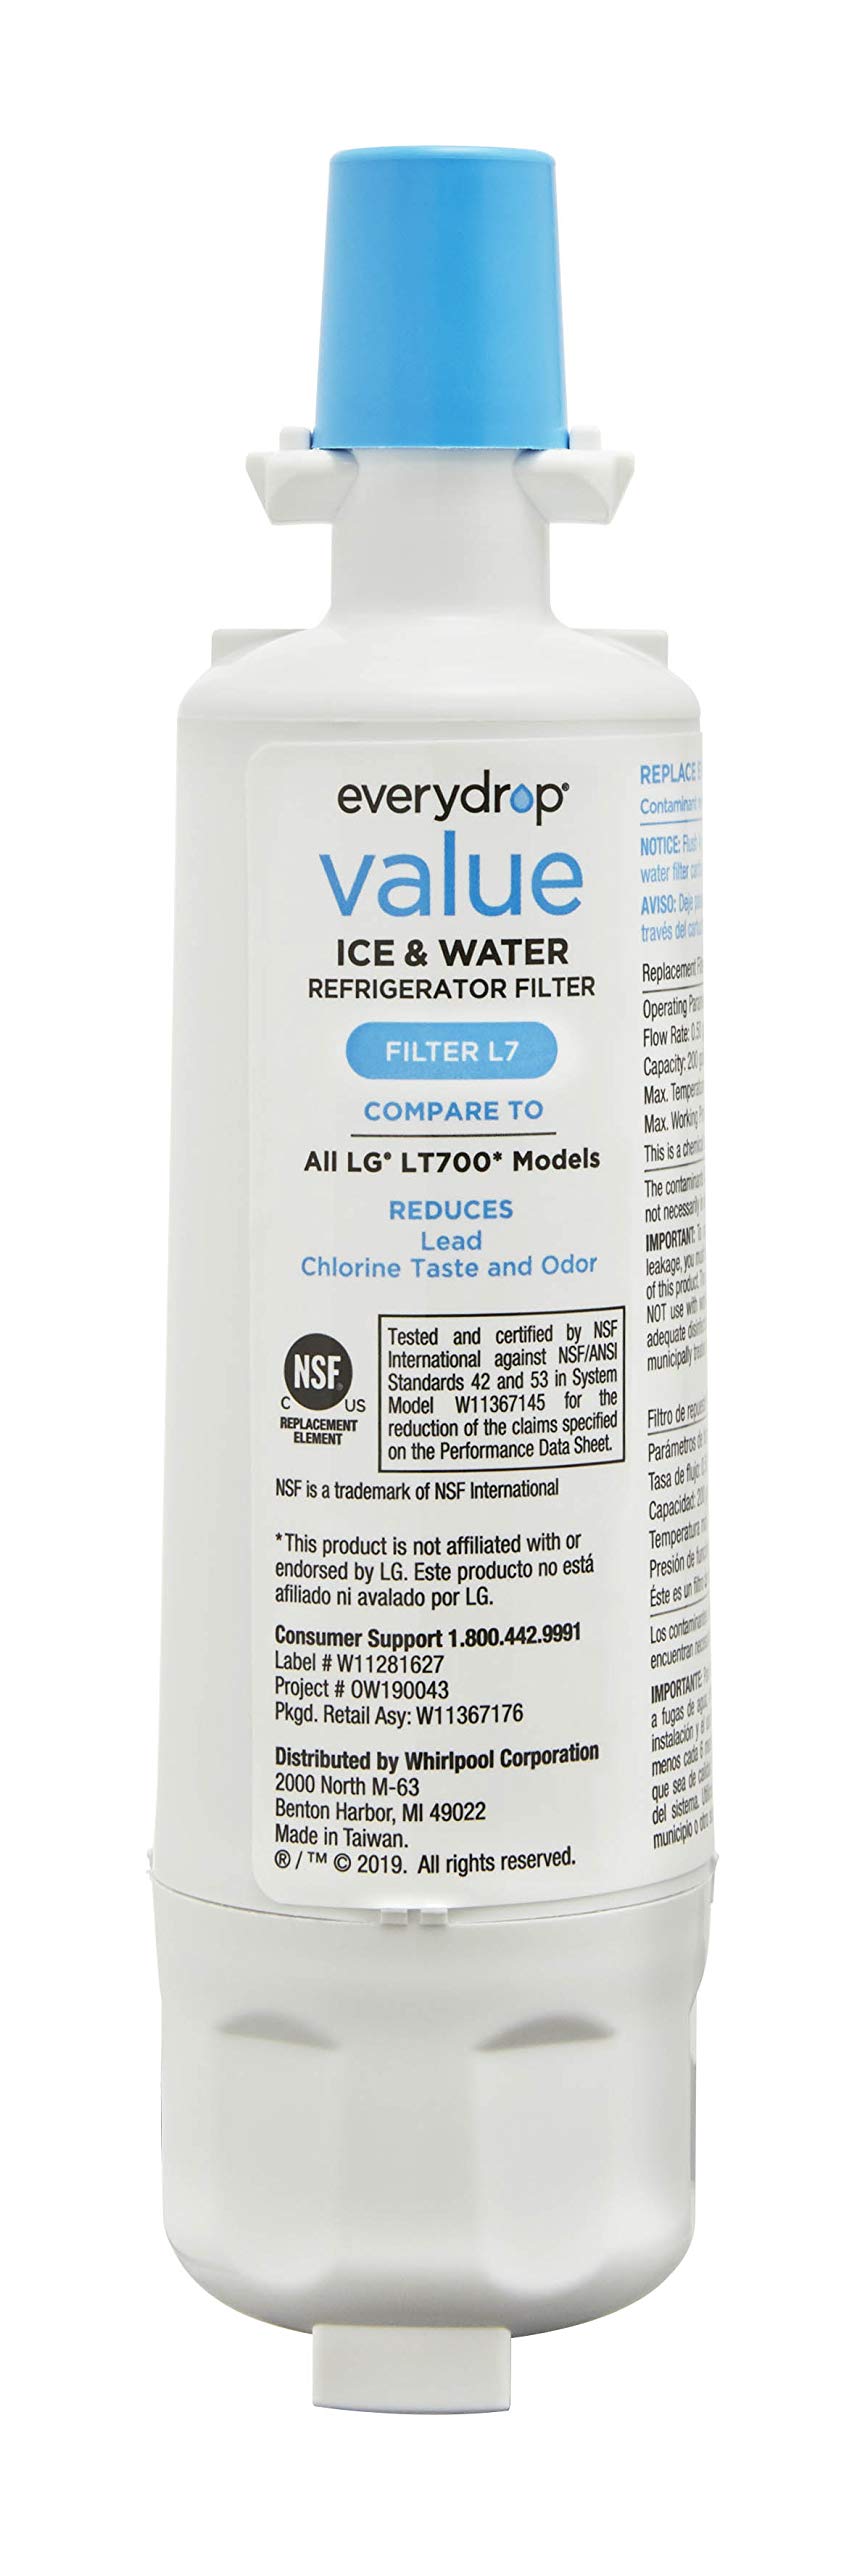 Everydrop Value by Whirlpool, Replacement Water Filter for LG LT700P, EVFILTERL7, Single-Pack